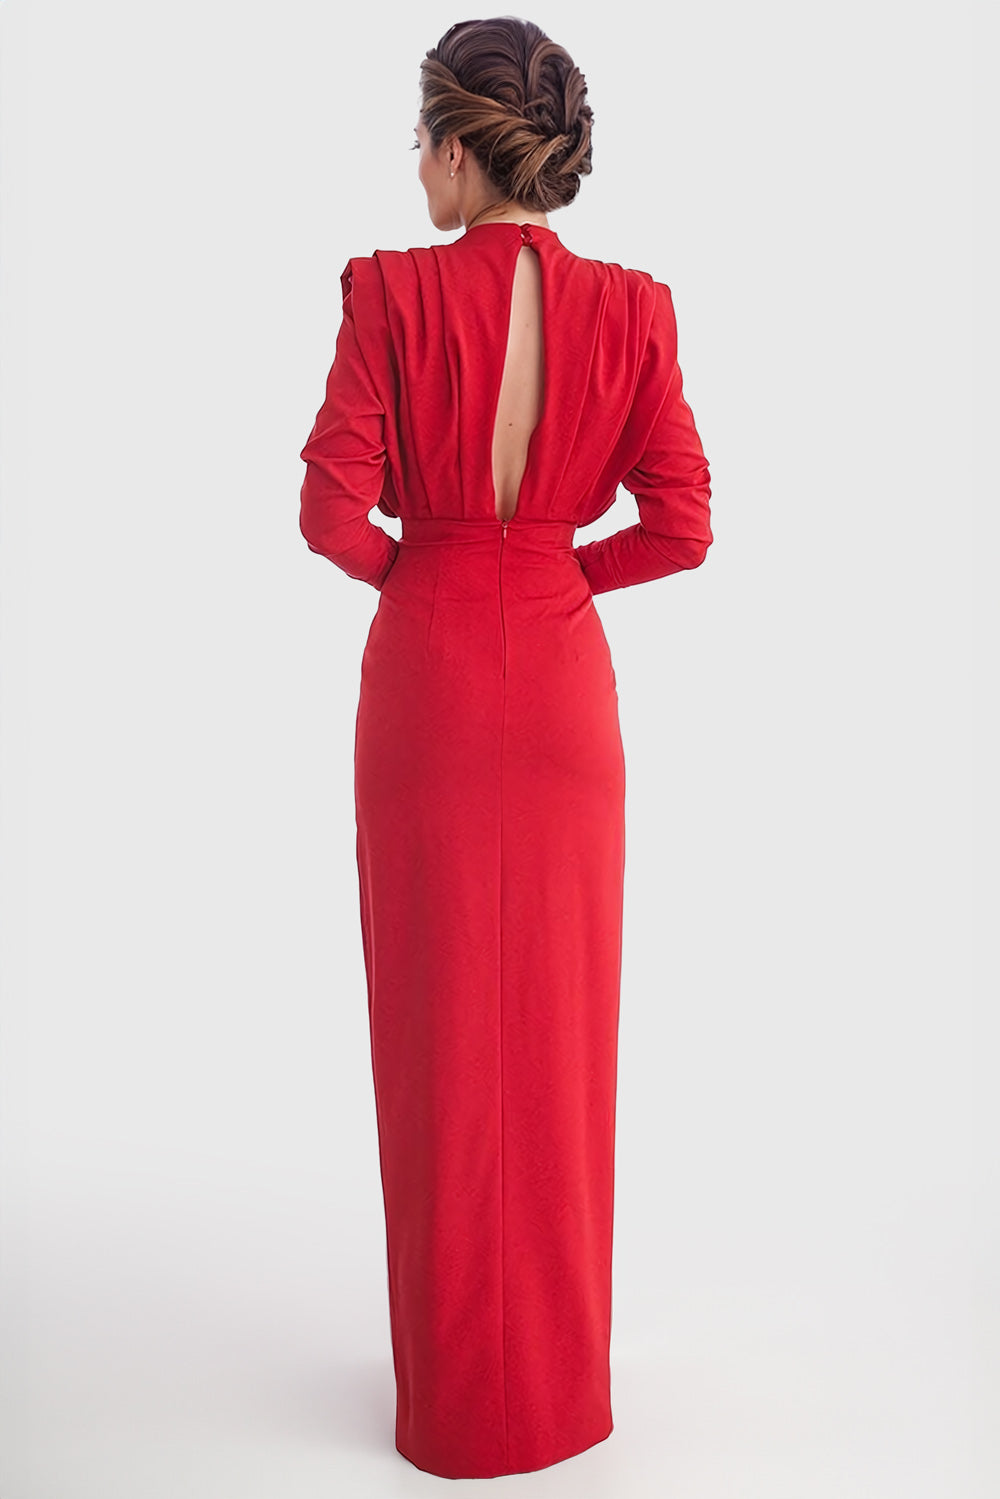 Sophisticated Long-Sleeve Maxi Dress with High Slit - Red